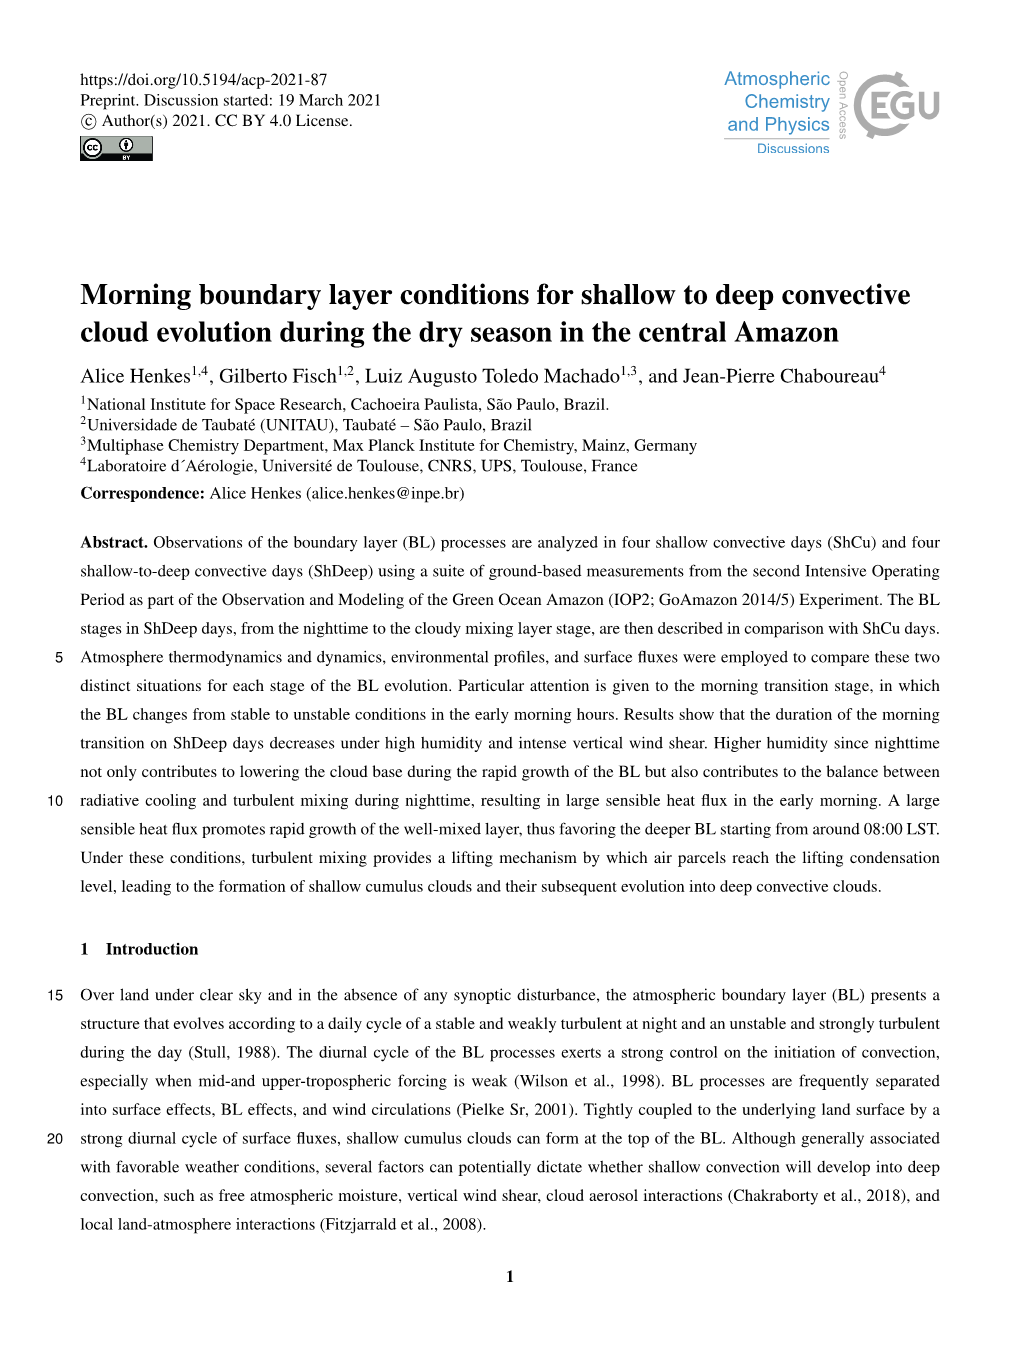 Morning Boundary Layer Conditions for Shallow to Deep Convective Cloud